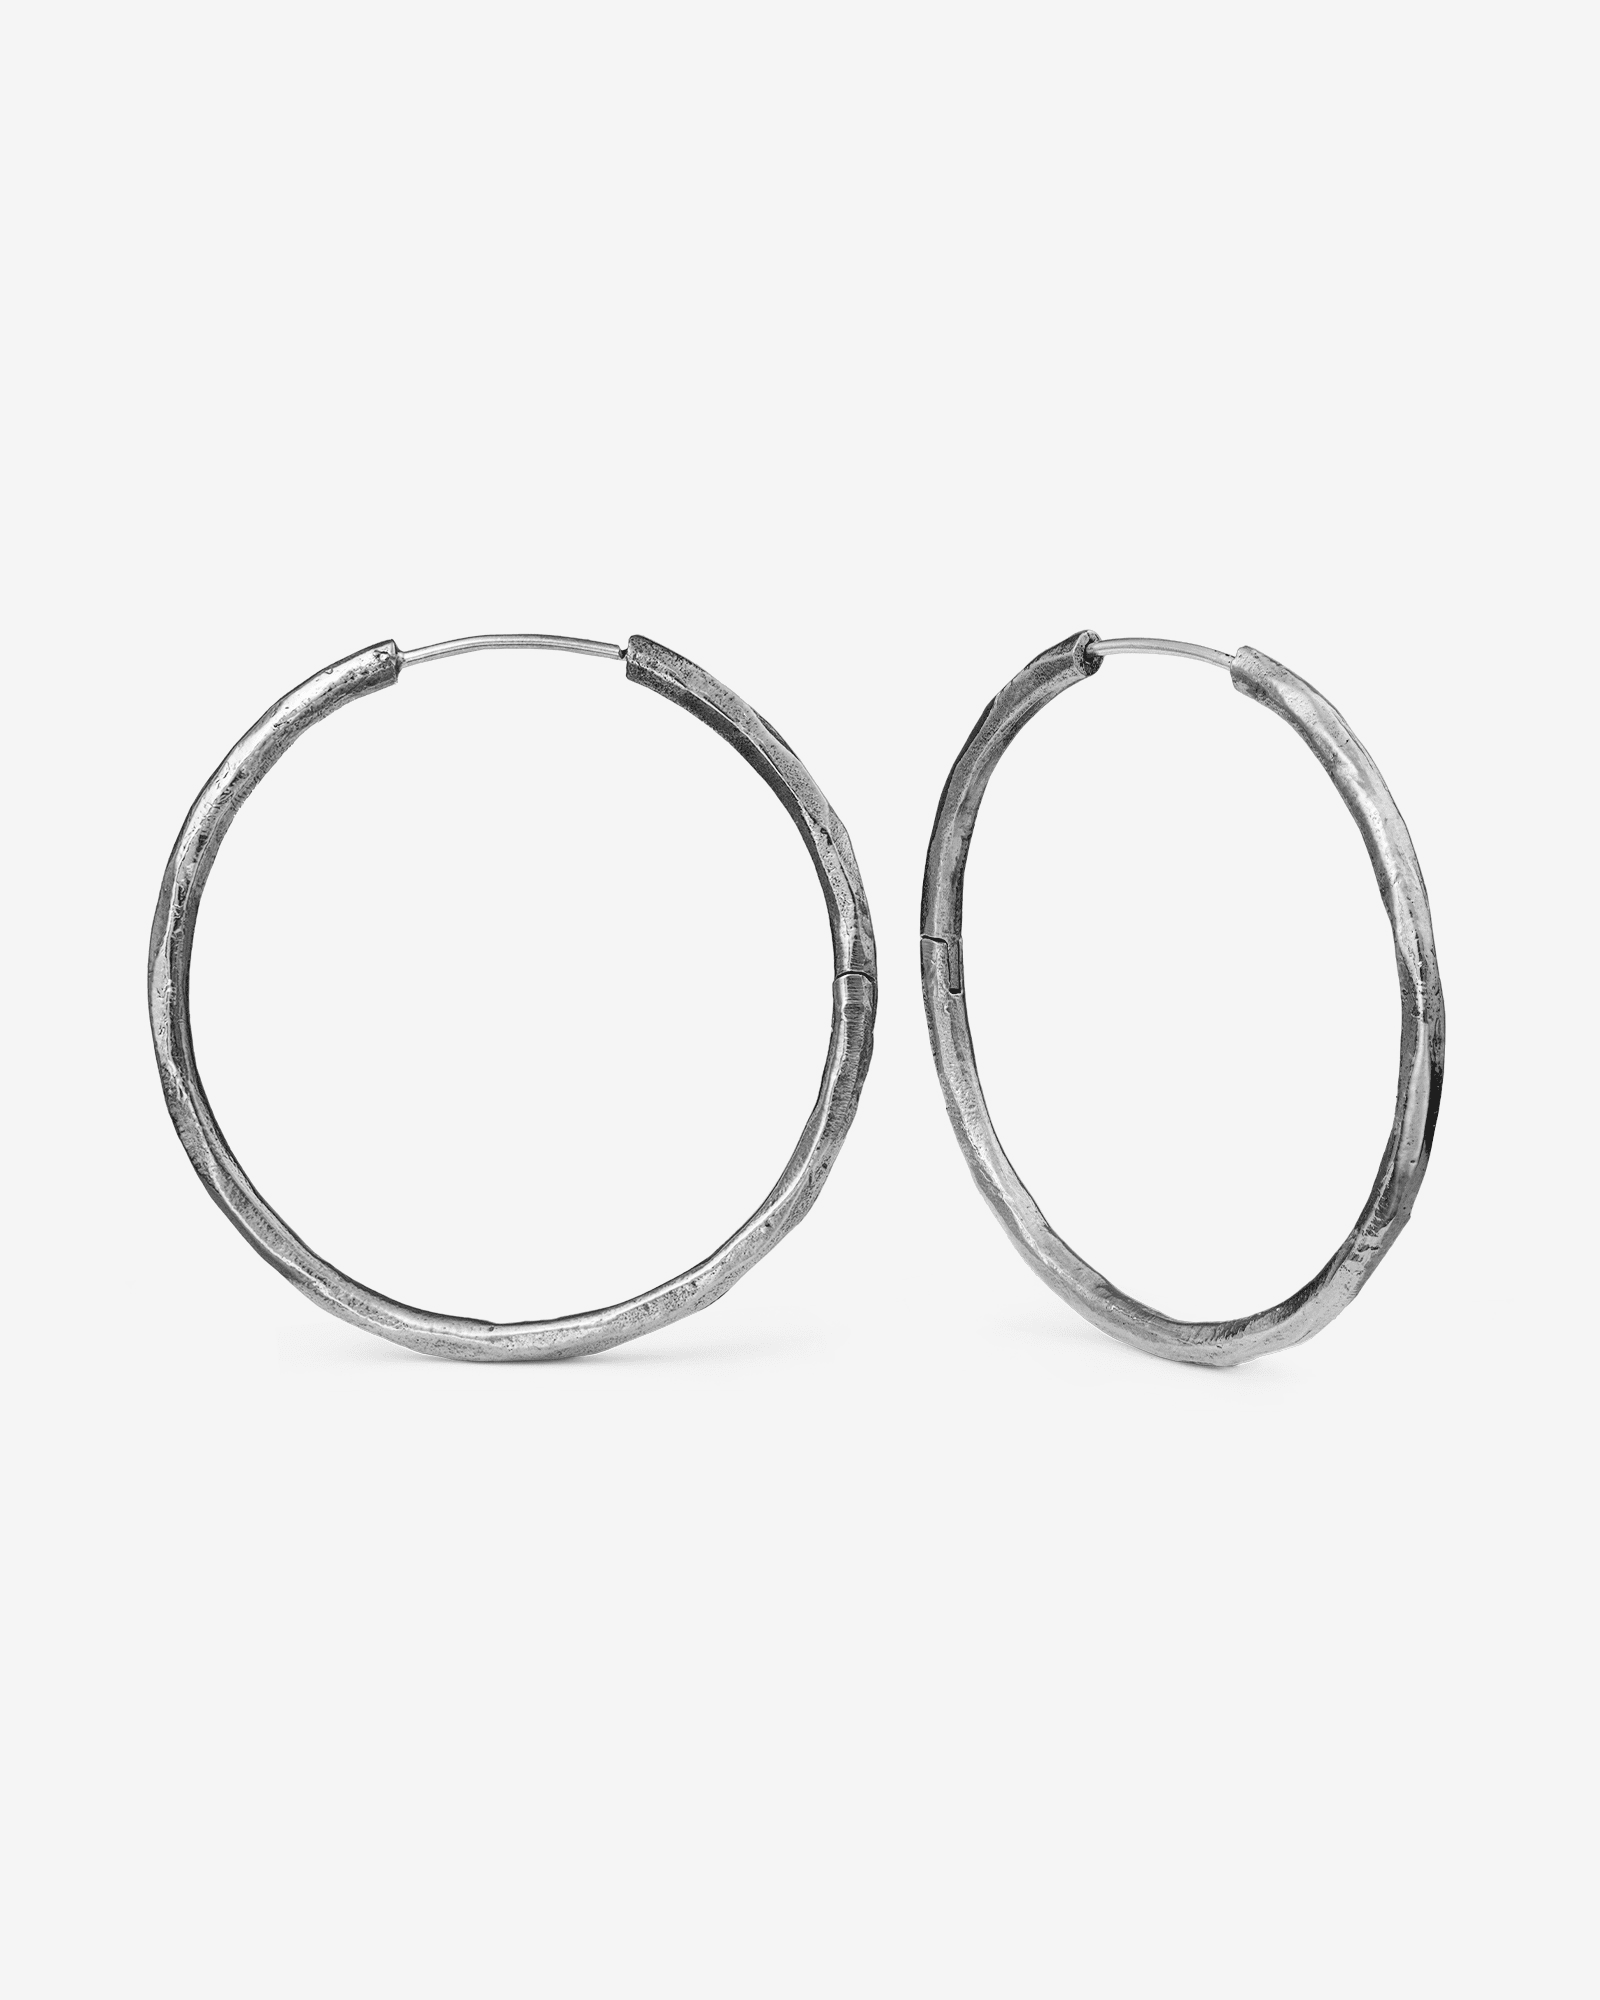 Peora 925 Pure Sterling Silver Hoops Bali Earrings Pair with Rhodium  Plating & Cubic Zirconia for Women Girls : Amazon.in: Jewellery